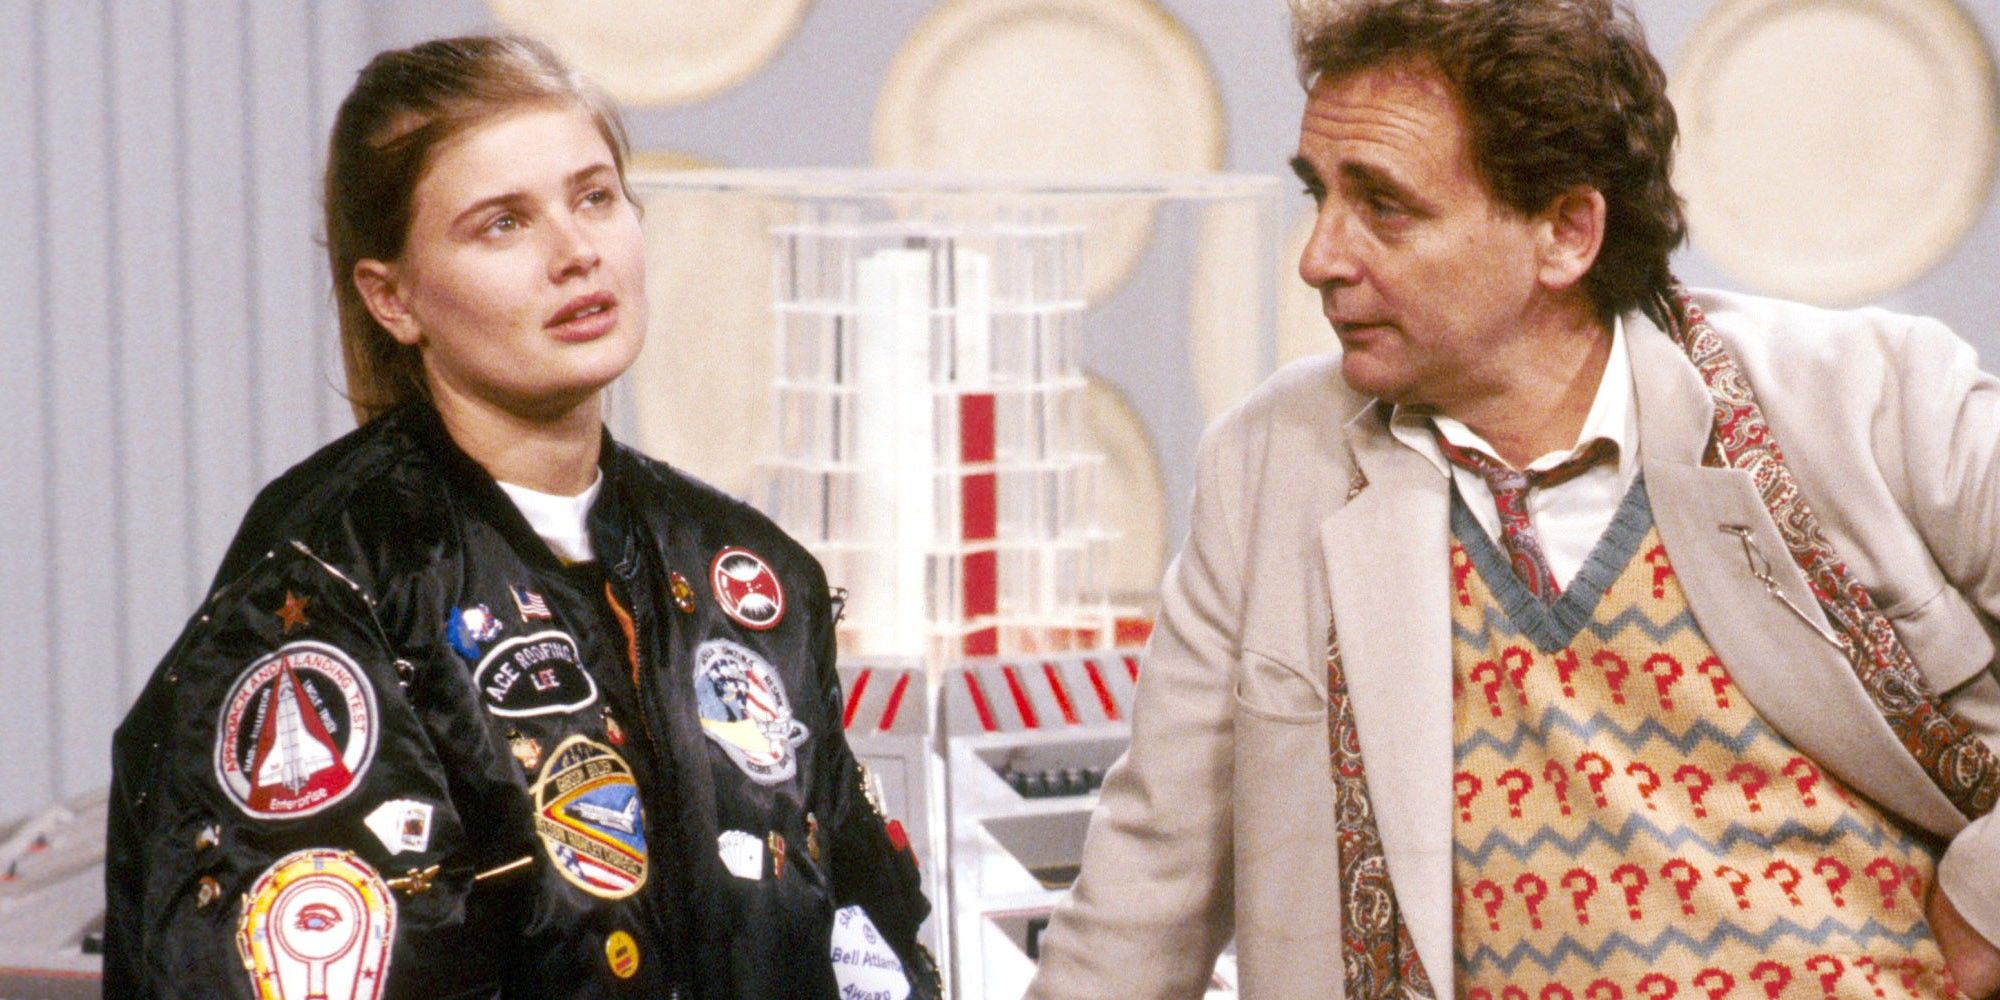 Sophie Aldred as Ace and Sylvester McCoy as Seventh Doctor in Doctor Who